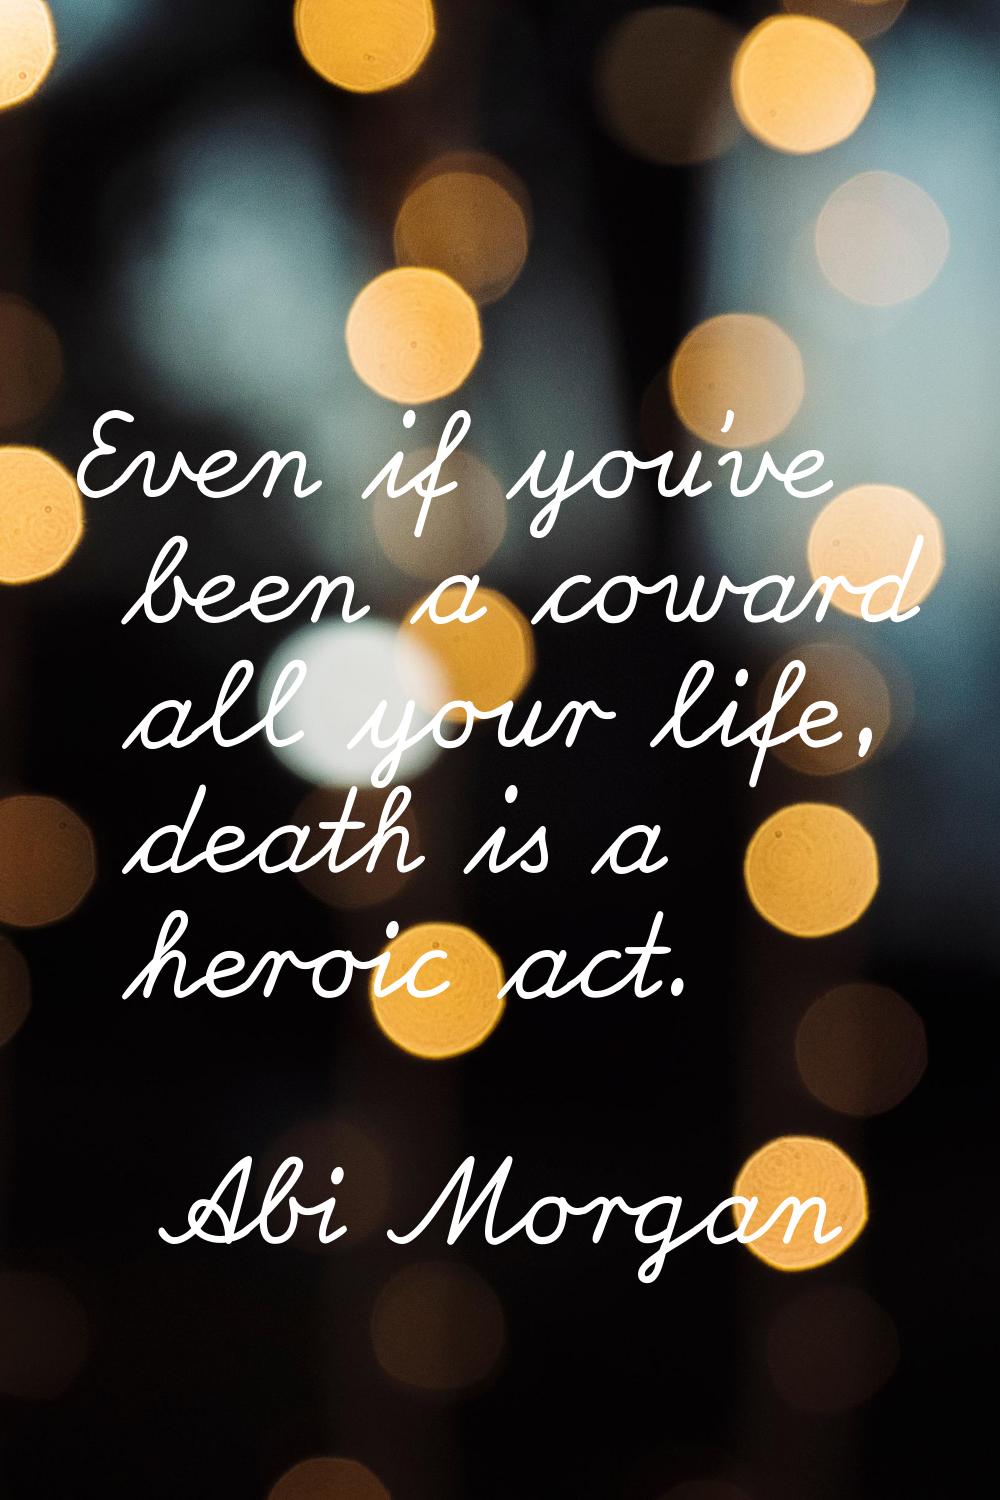 Even if you've been a coward all your life, death is a heroic act.